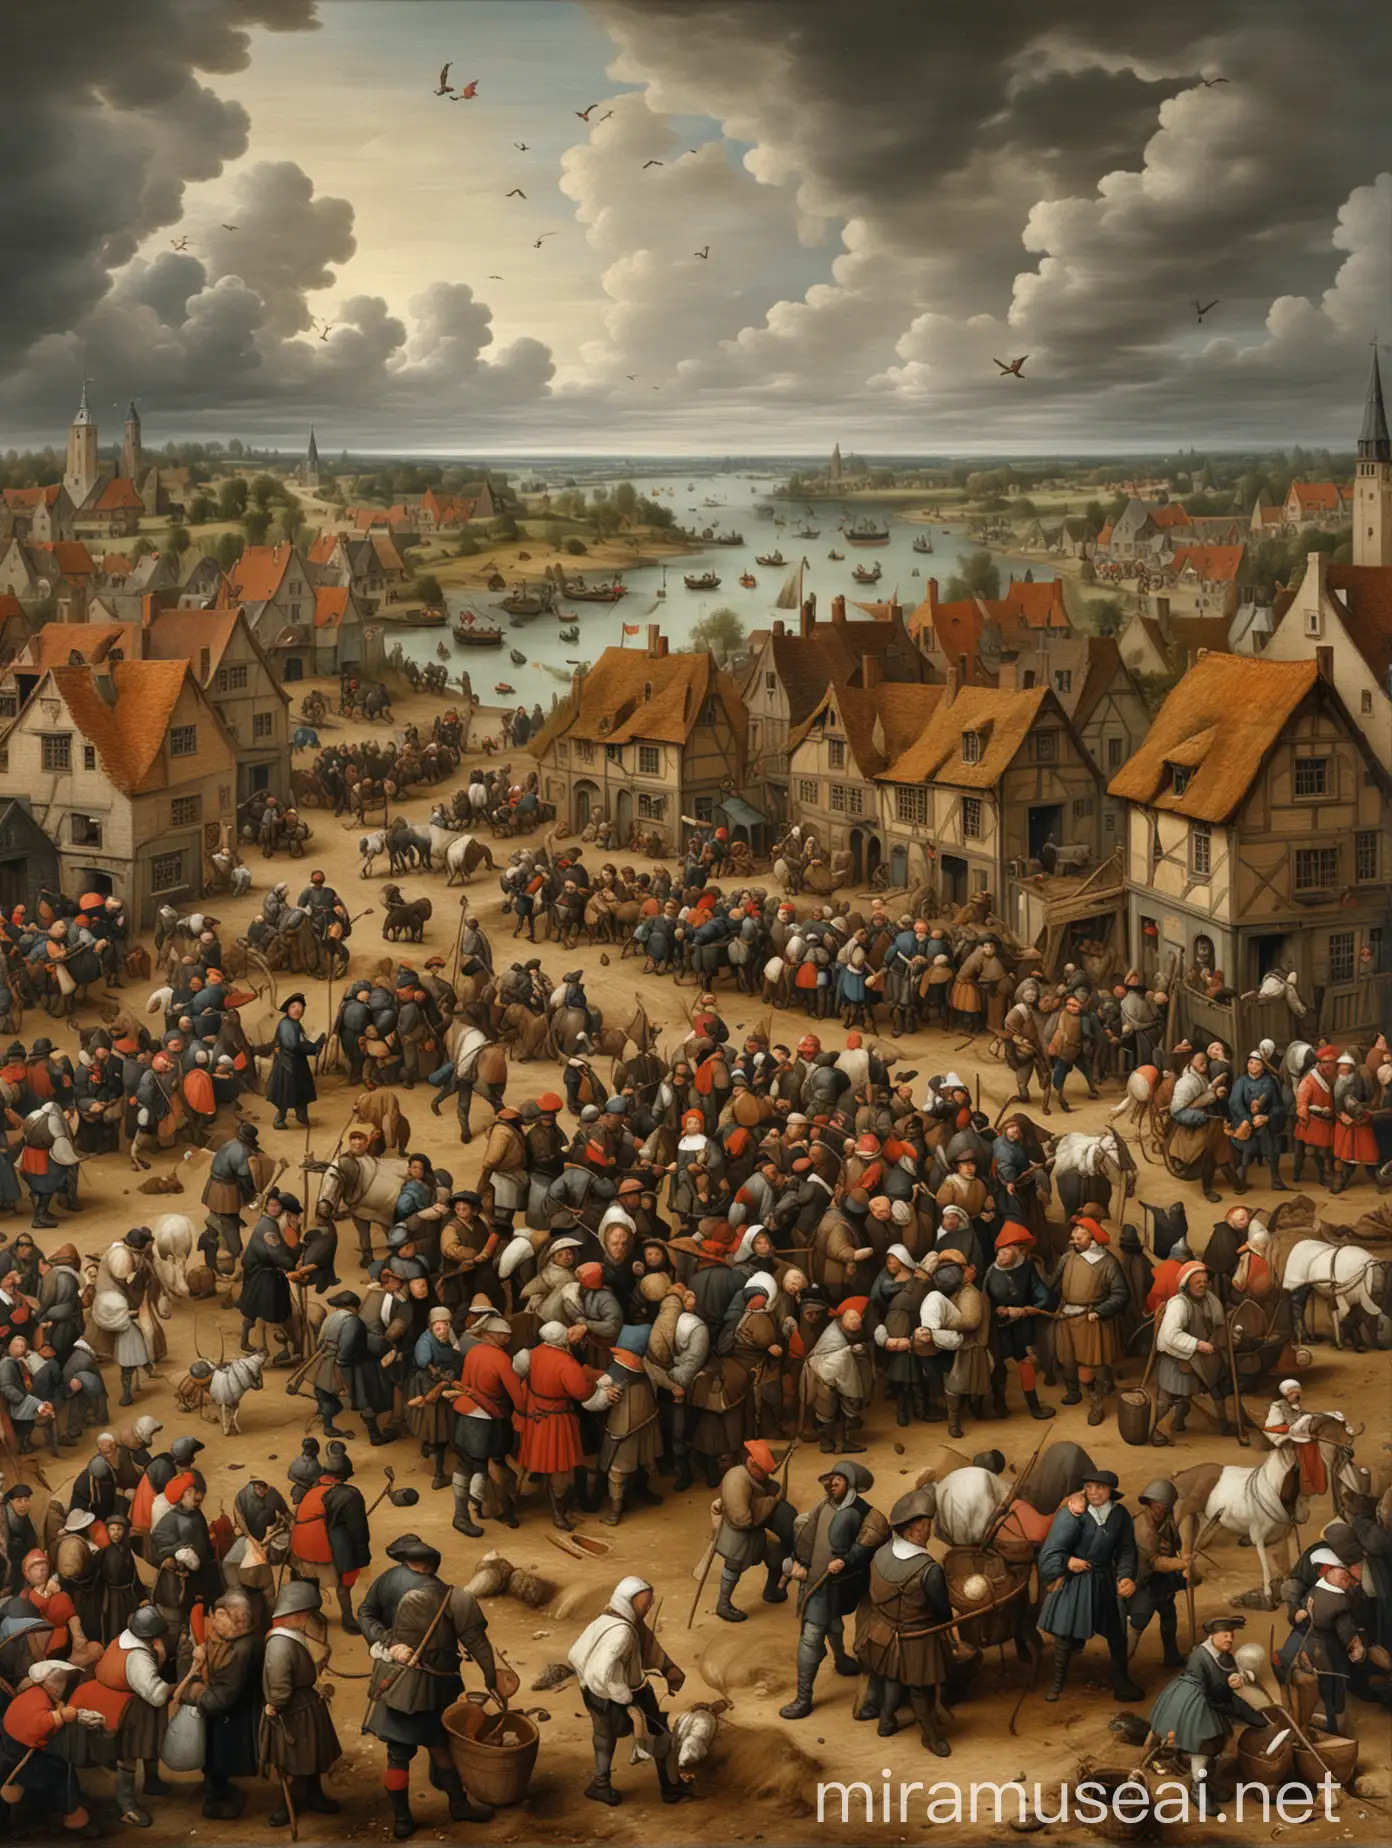 Detailed Painting of Netherlandisch Proverbs Landscape with Muted Colors